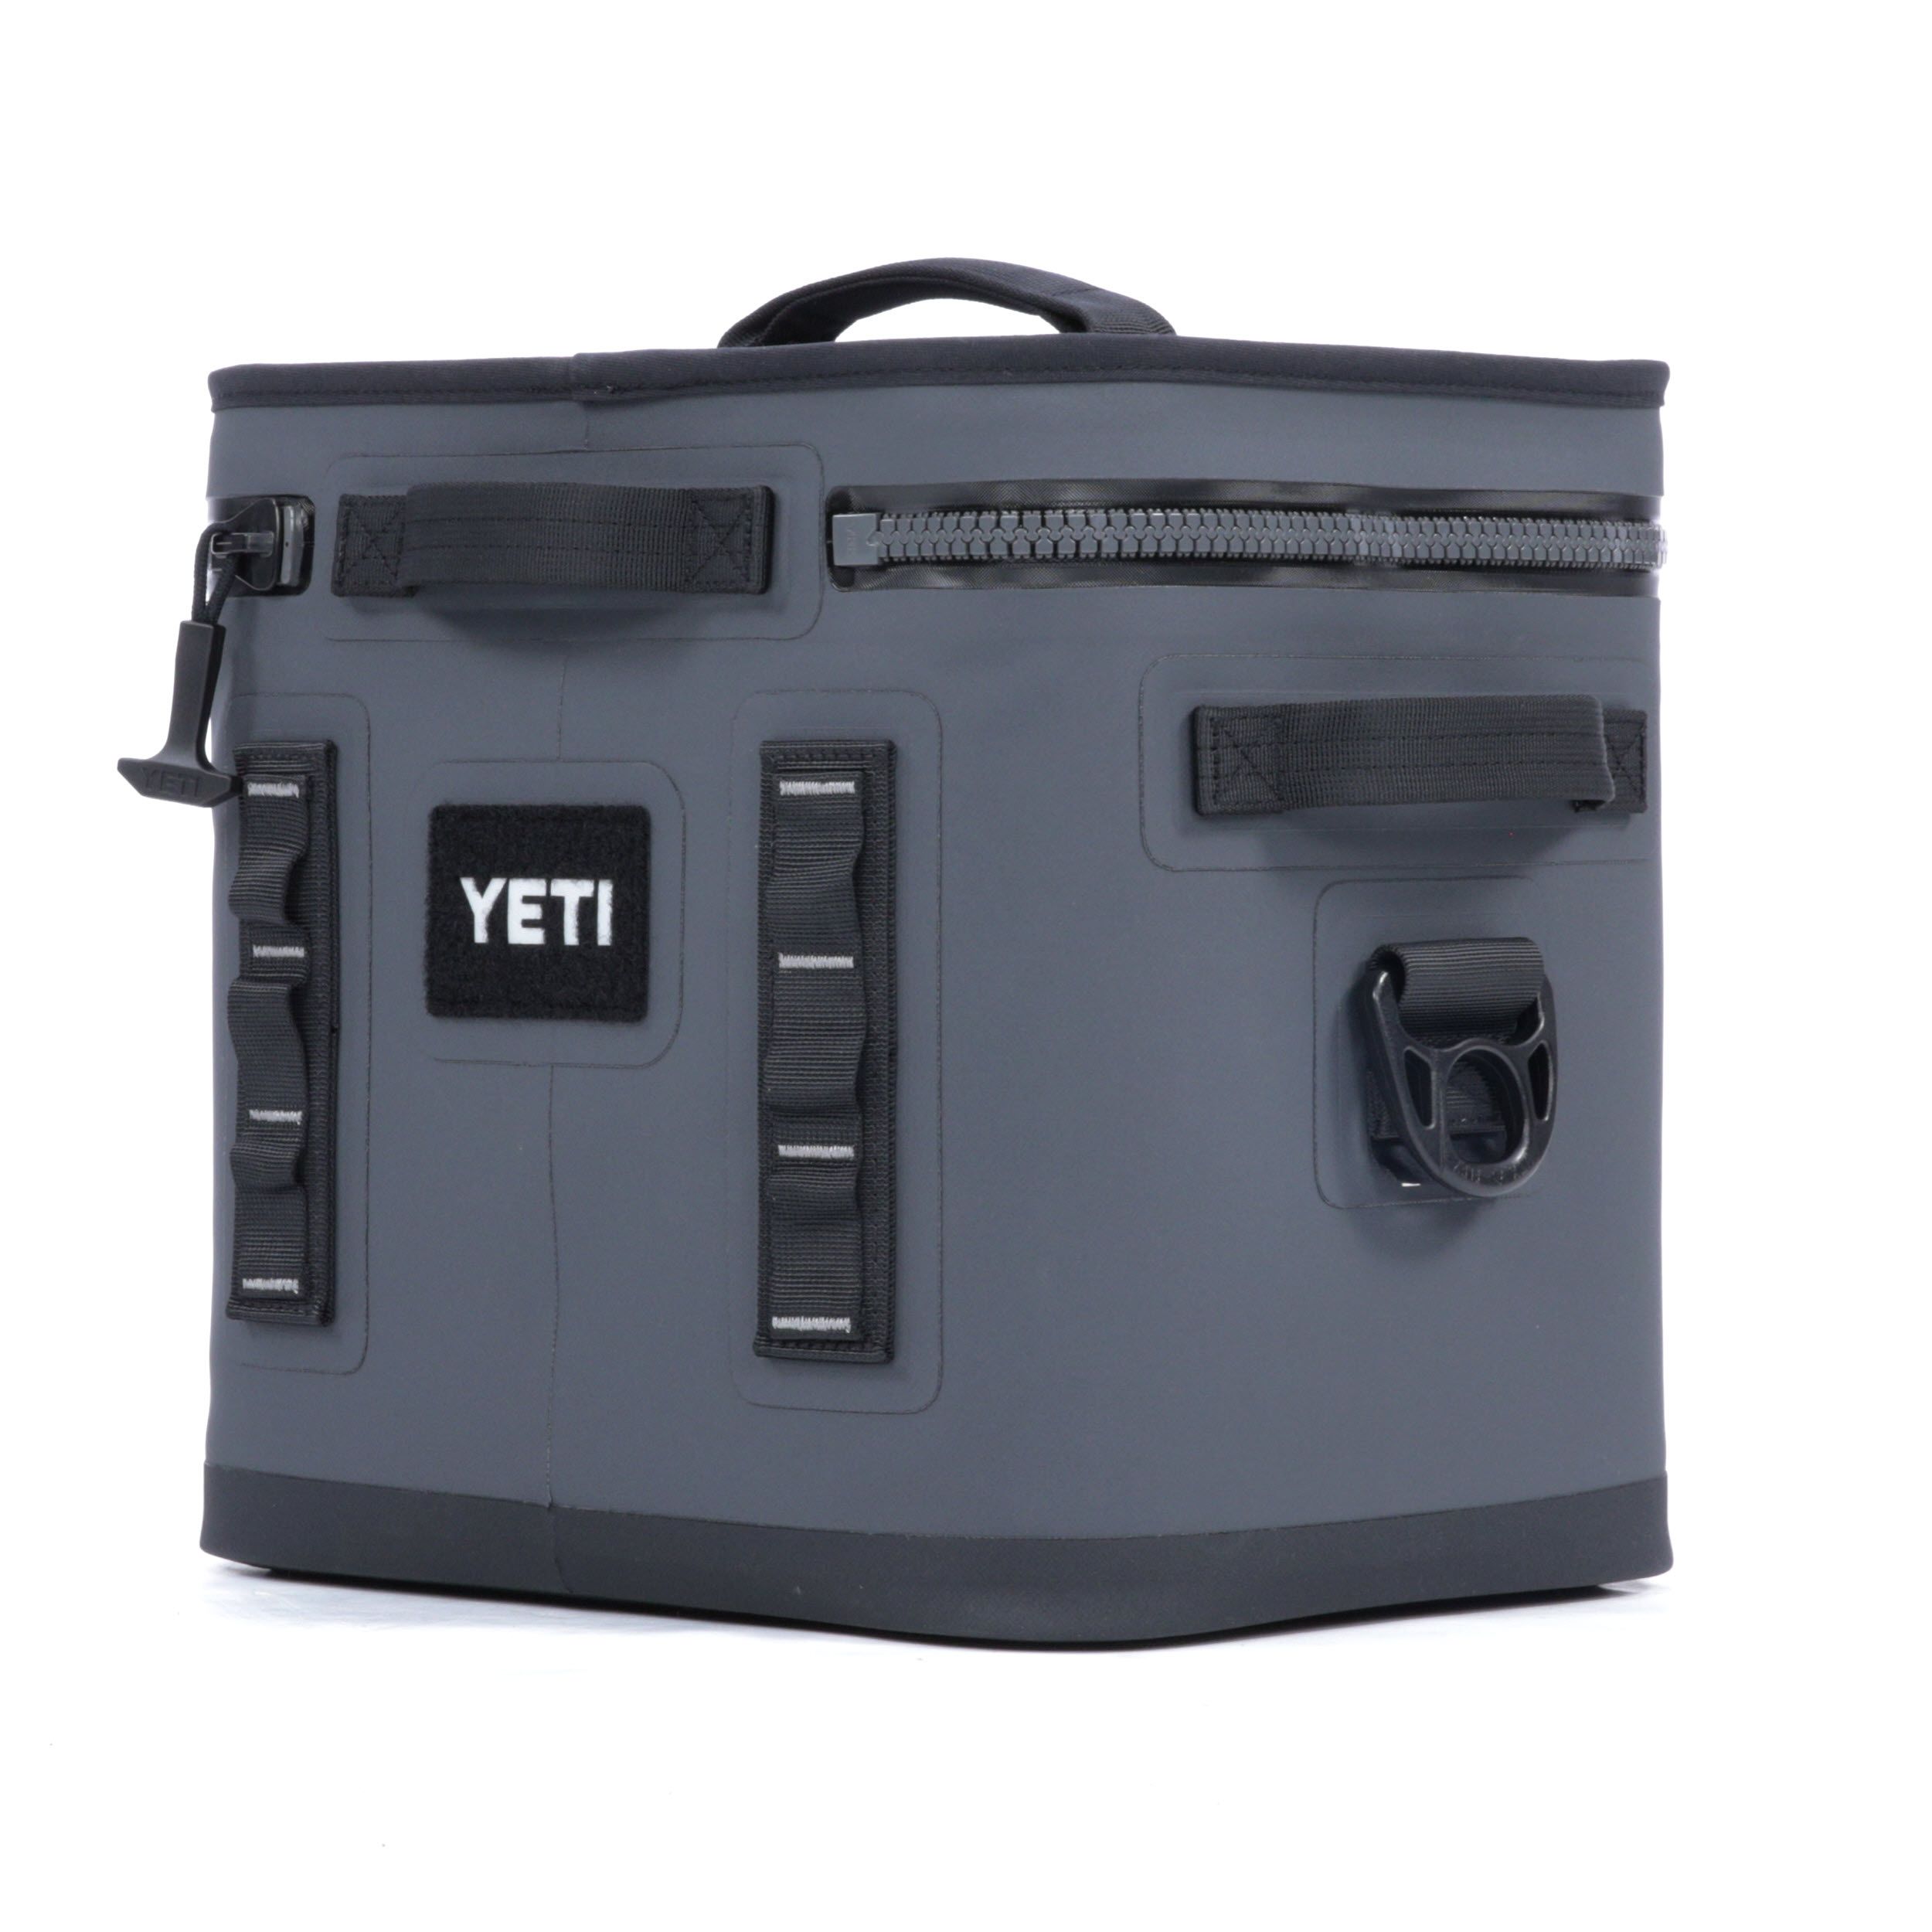 YETI Hopper Flip 12 Insulated Personal Cooler, Charcoal at Lowes.com